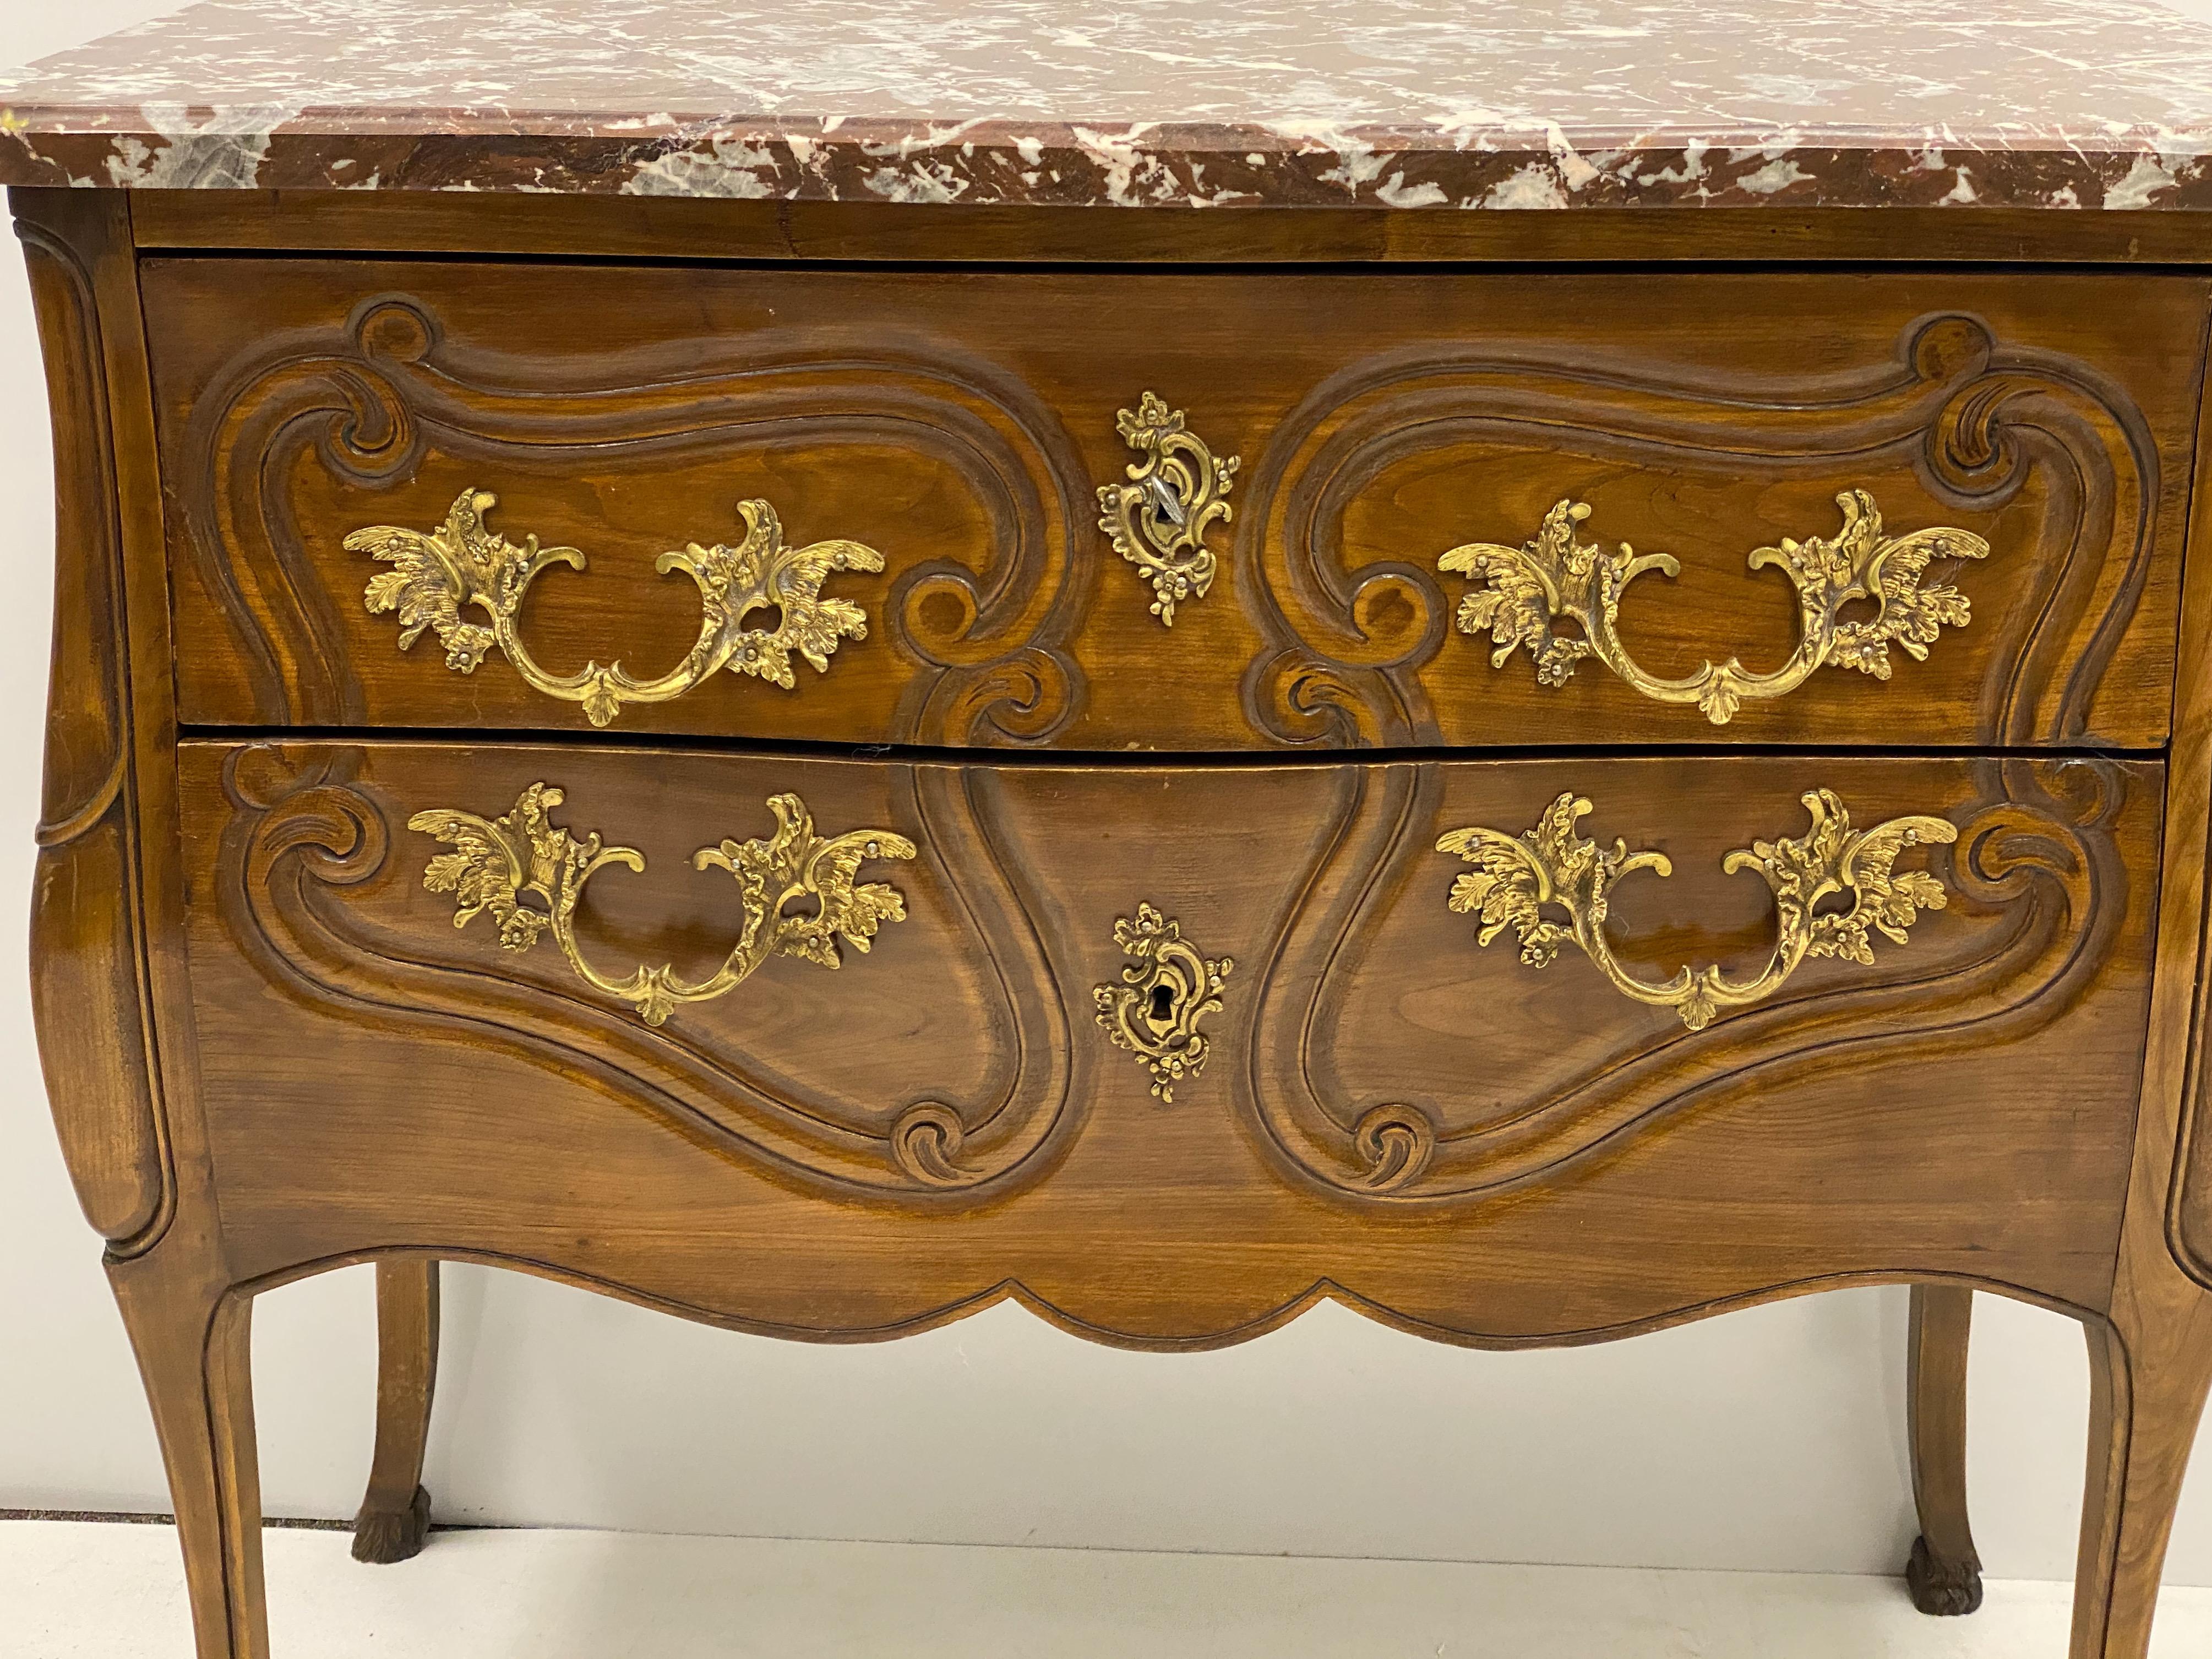 This is an Italian carved walnut chest with a rouge marble top. The piece has French styling, hairy paw feet, and the original hardware and key. It is unmarked. It most likely dates to the earlier part of the 20th century.